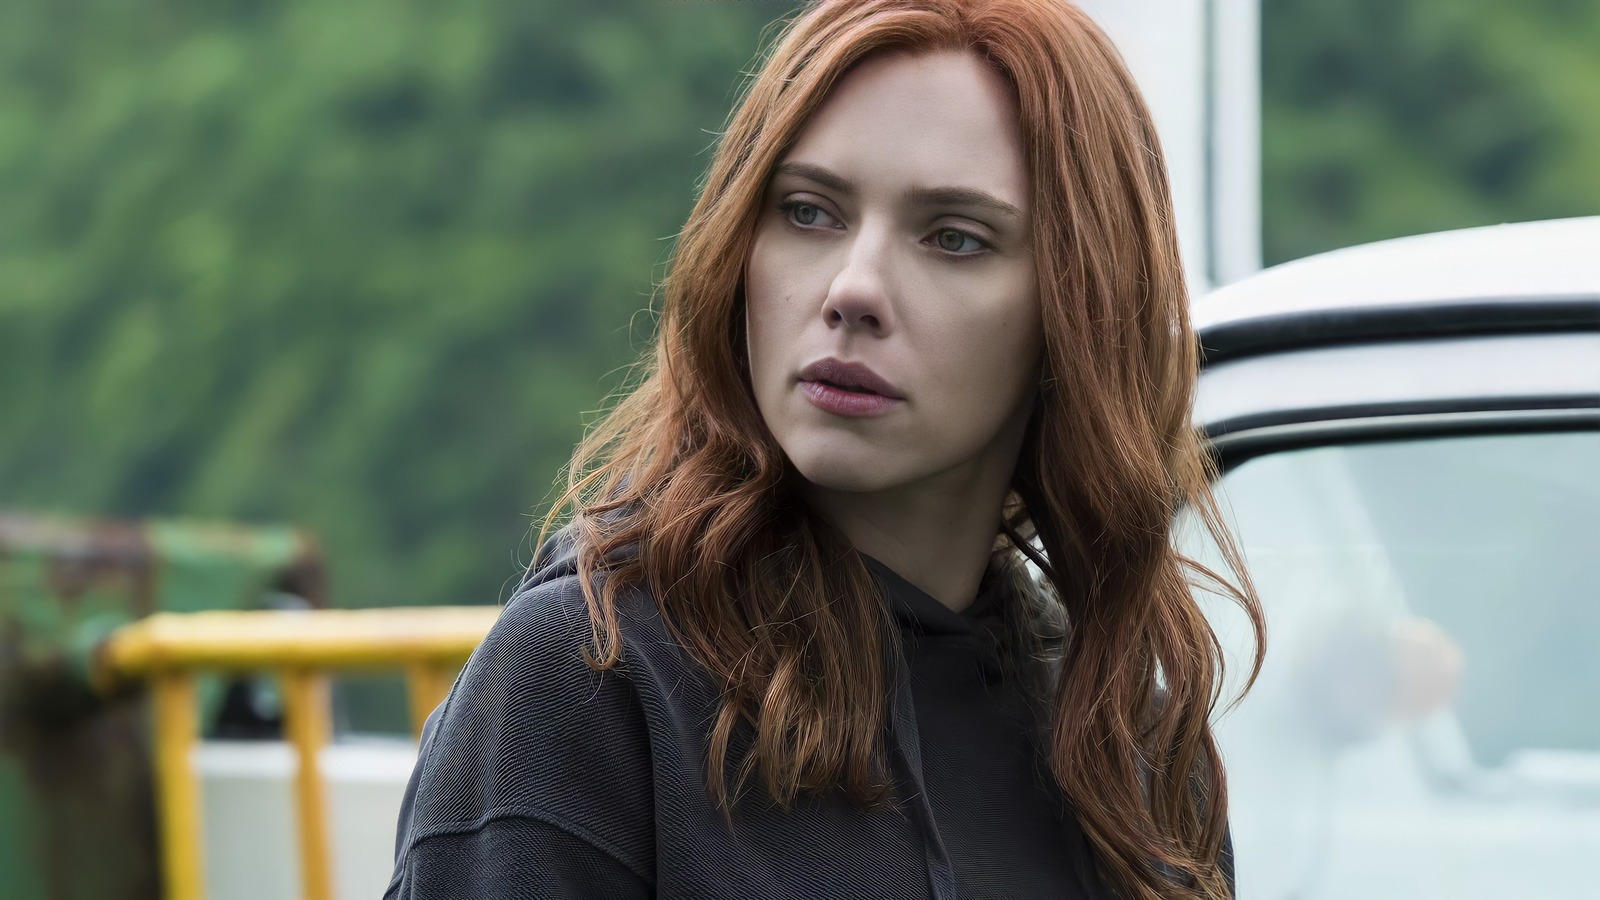 Upcoming Scarlett Johansson Movies: What's Ahead For The Marvel